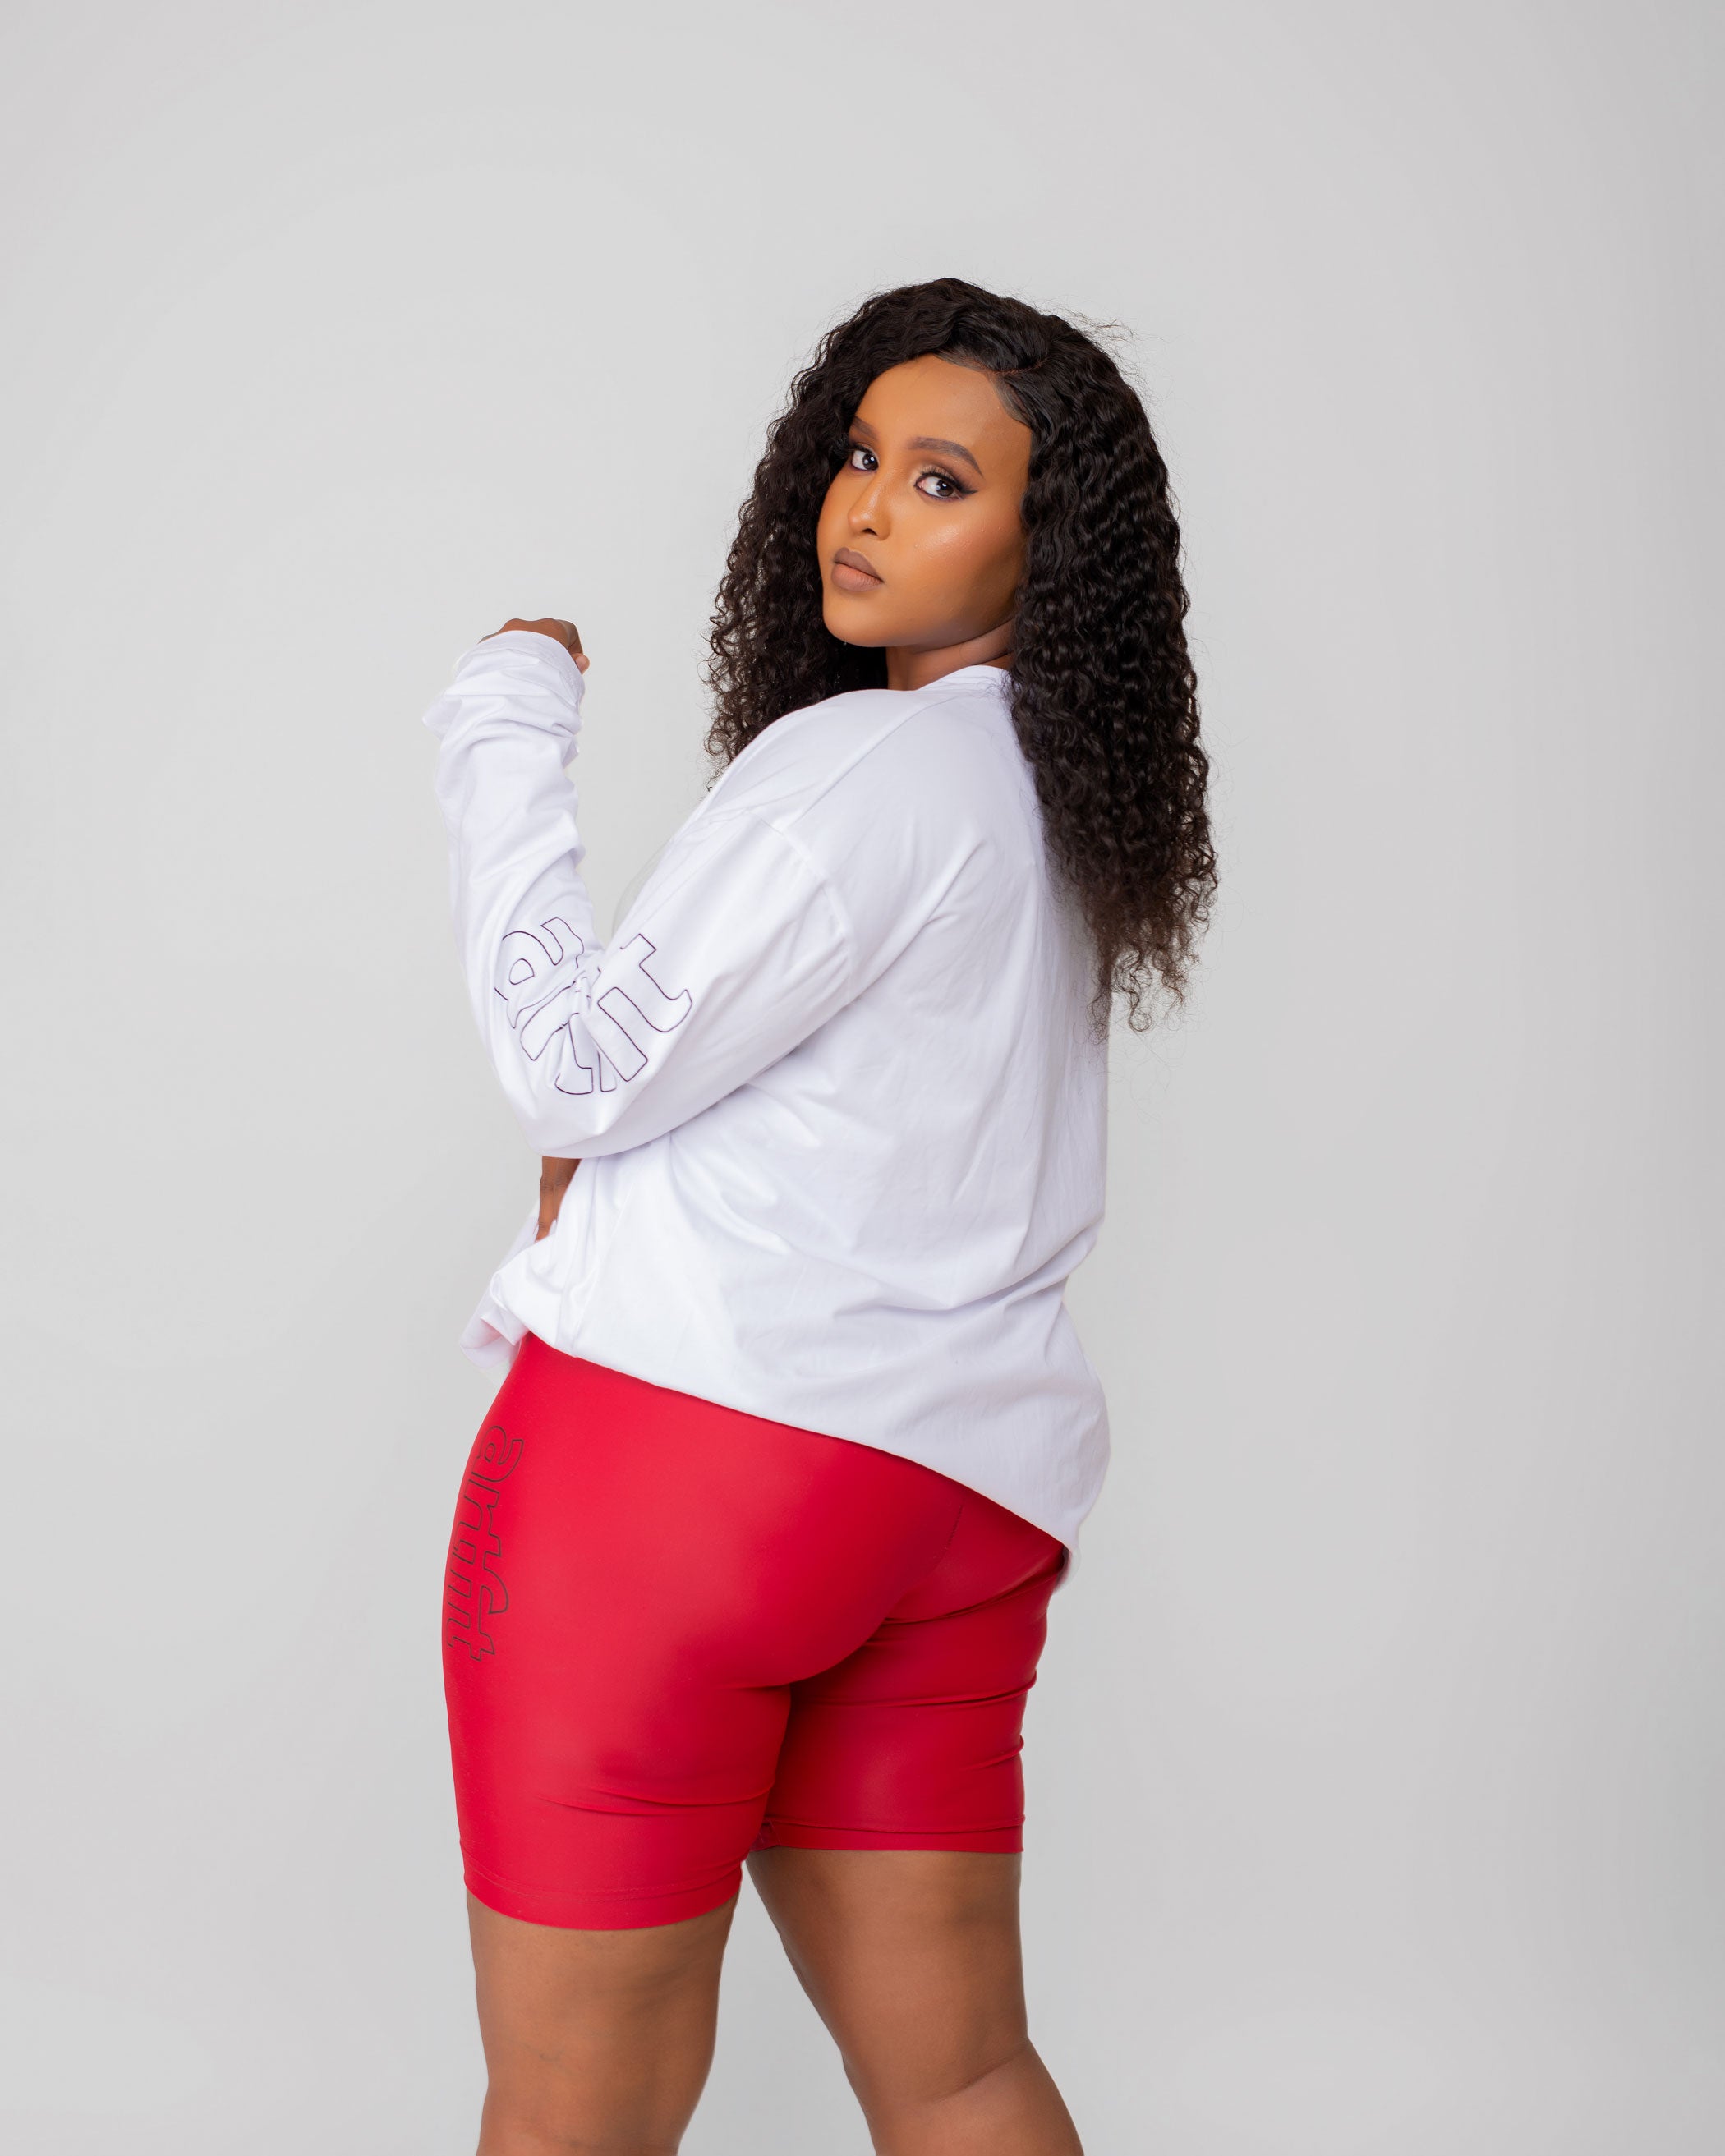 Classic Oversized Long Sleeved Tshirt and Biker Short - White and Maroon